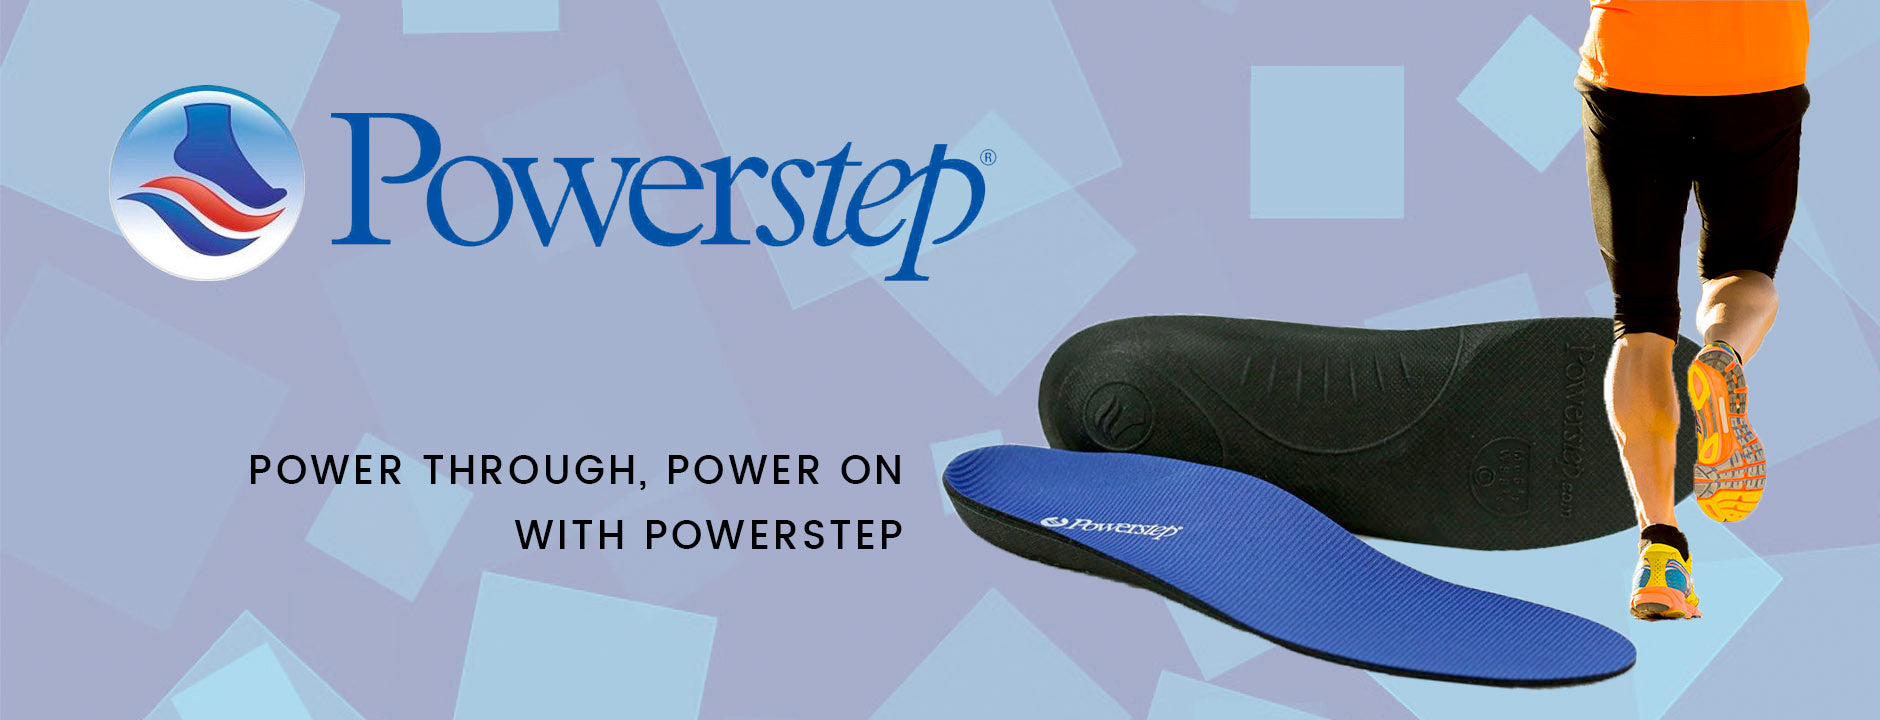 powerstep shoes